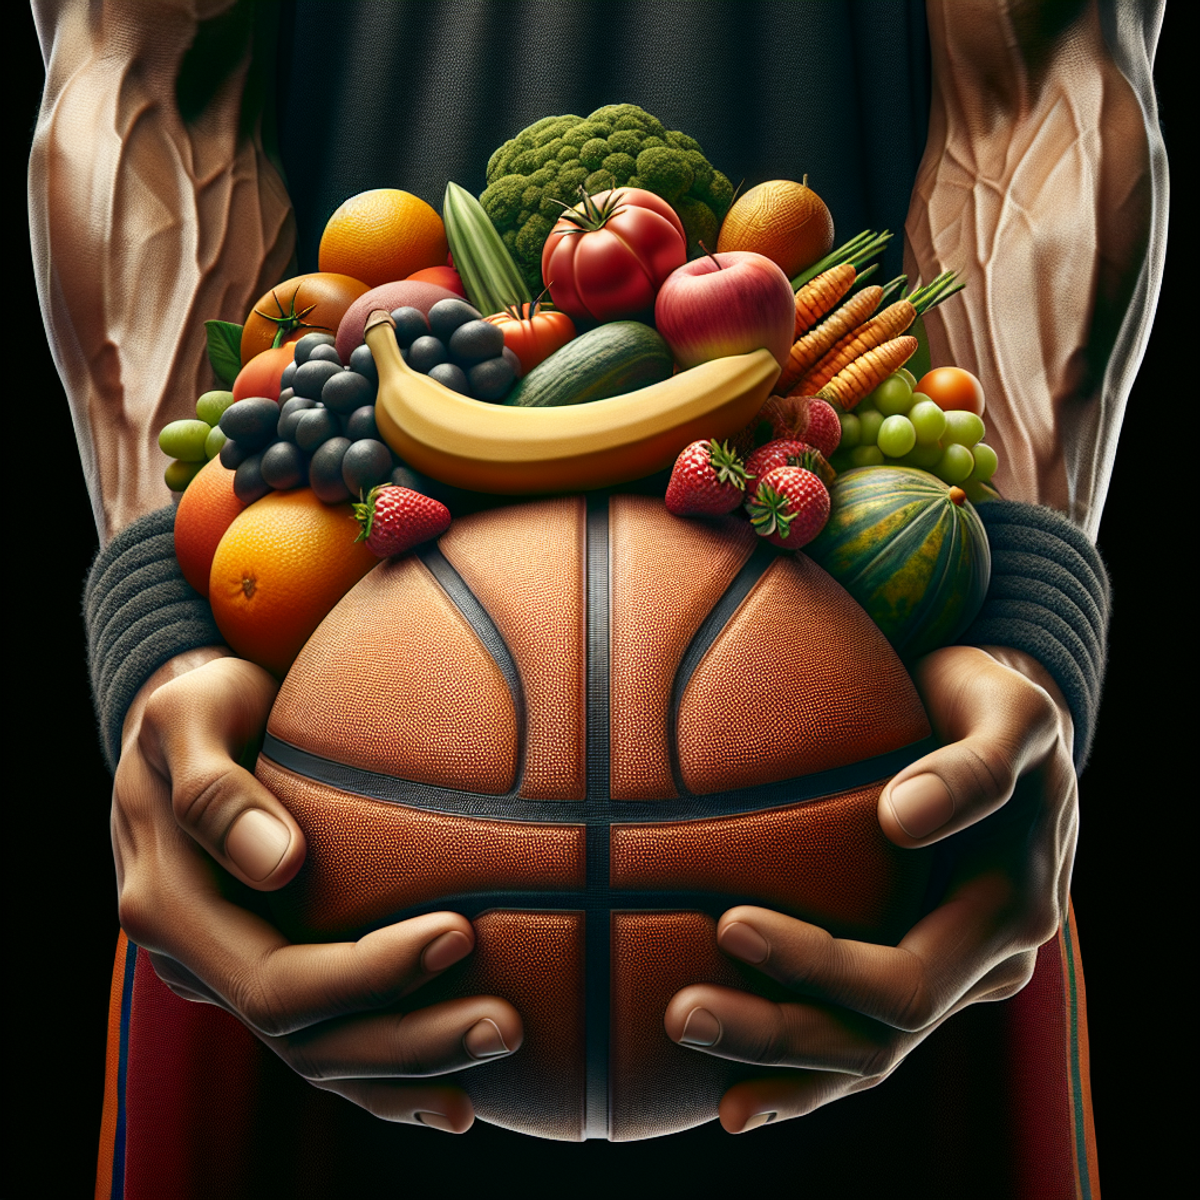 A close-up of a male South Asian basketball player's hands holding a variety of fruits and vegetables, with visible basketball texture.